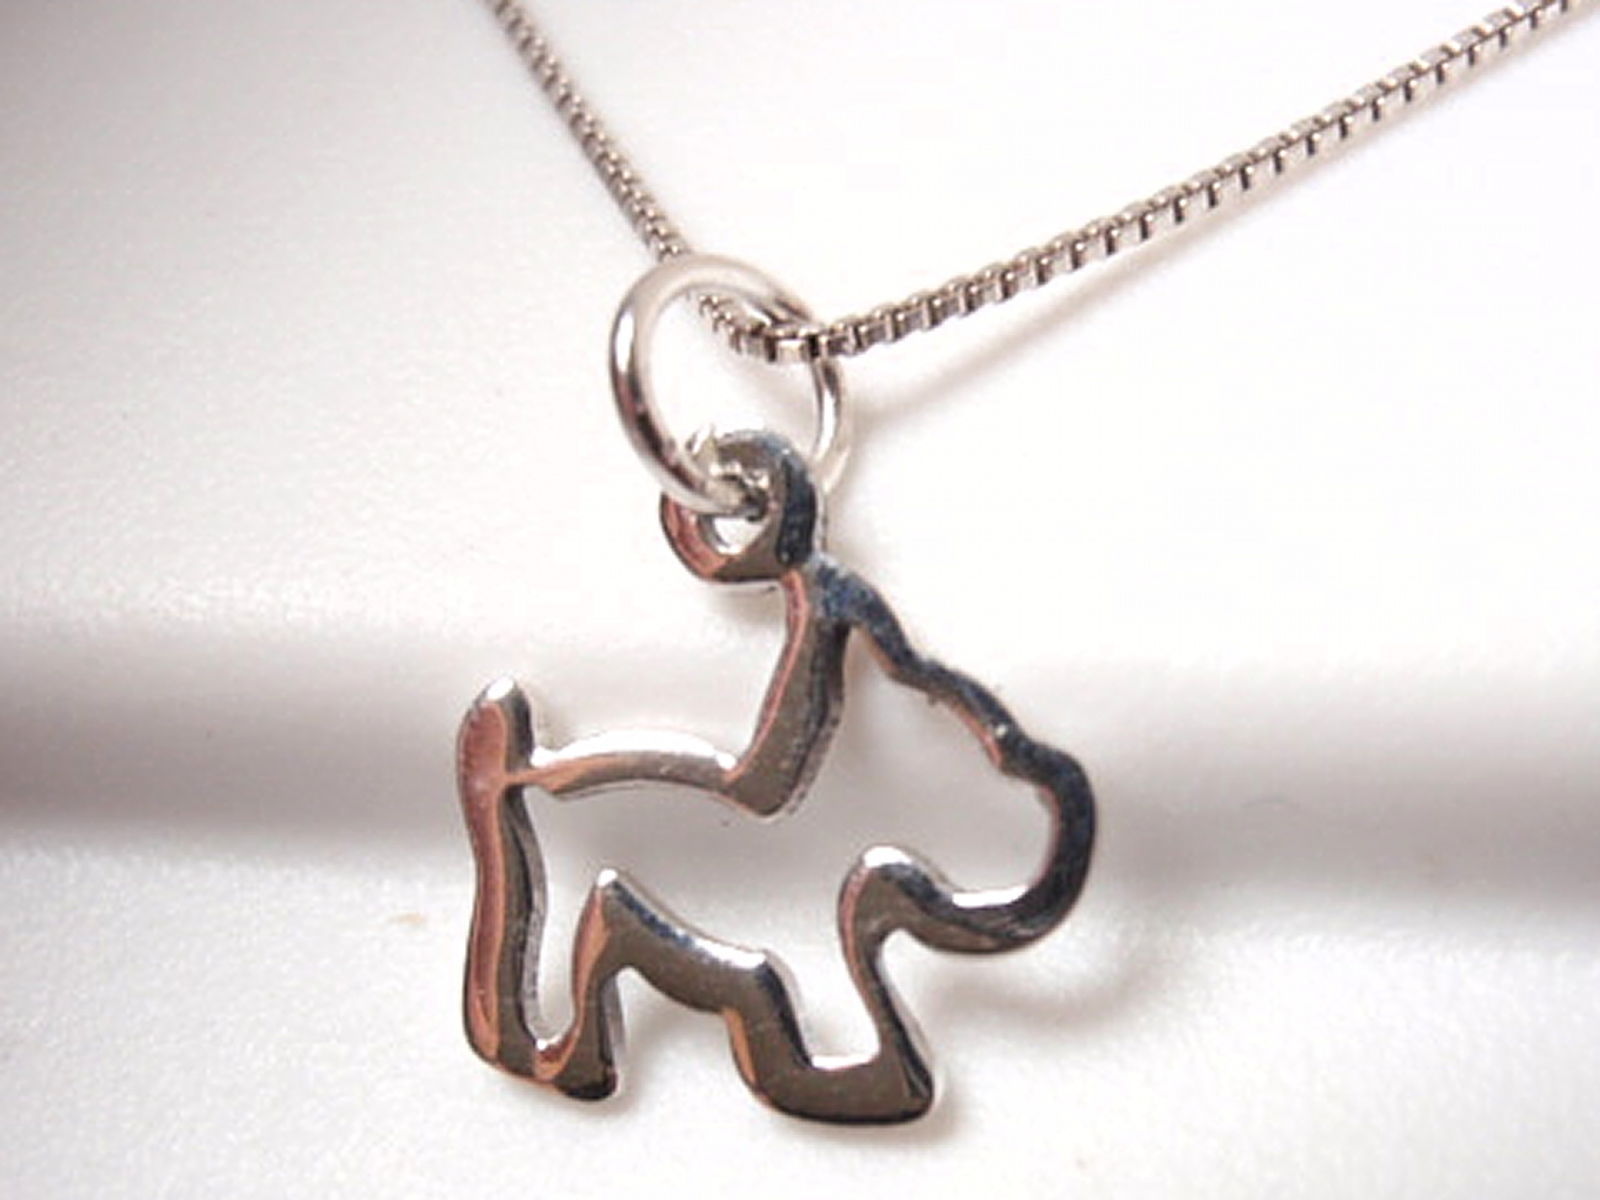 Very Small Cut Out Dog Necklace 925 Sterling Silver Corona Sun Jewelry puppy - $10.79